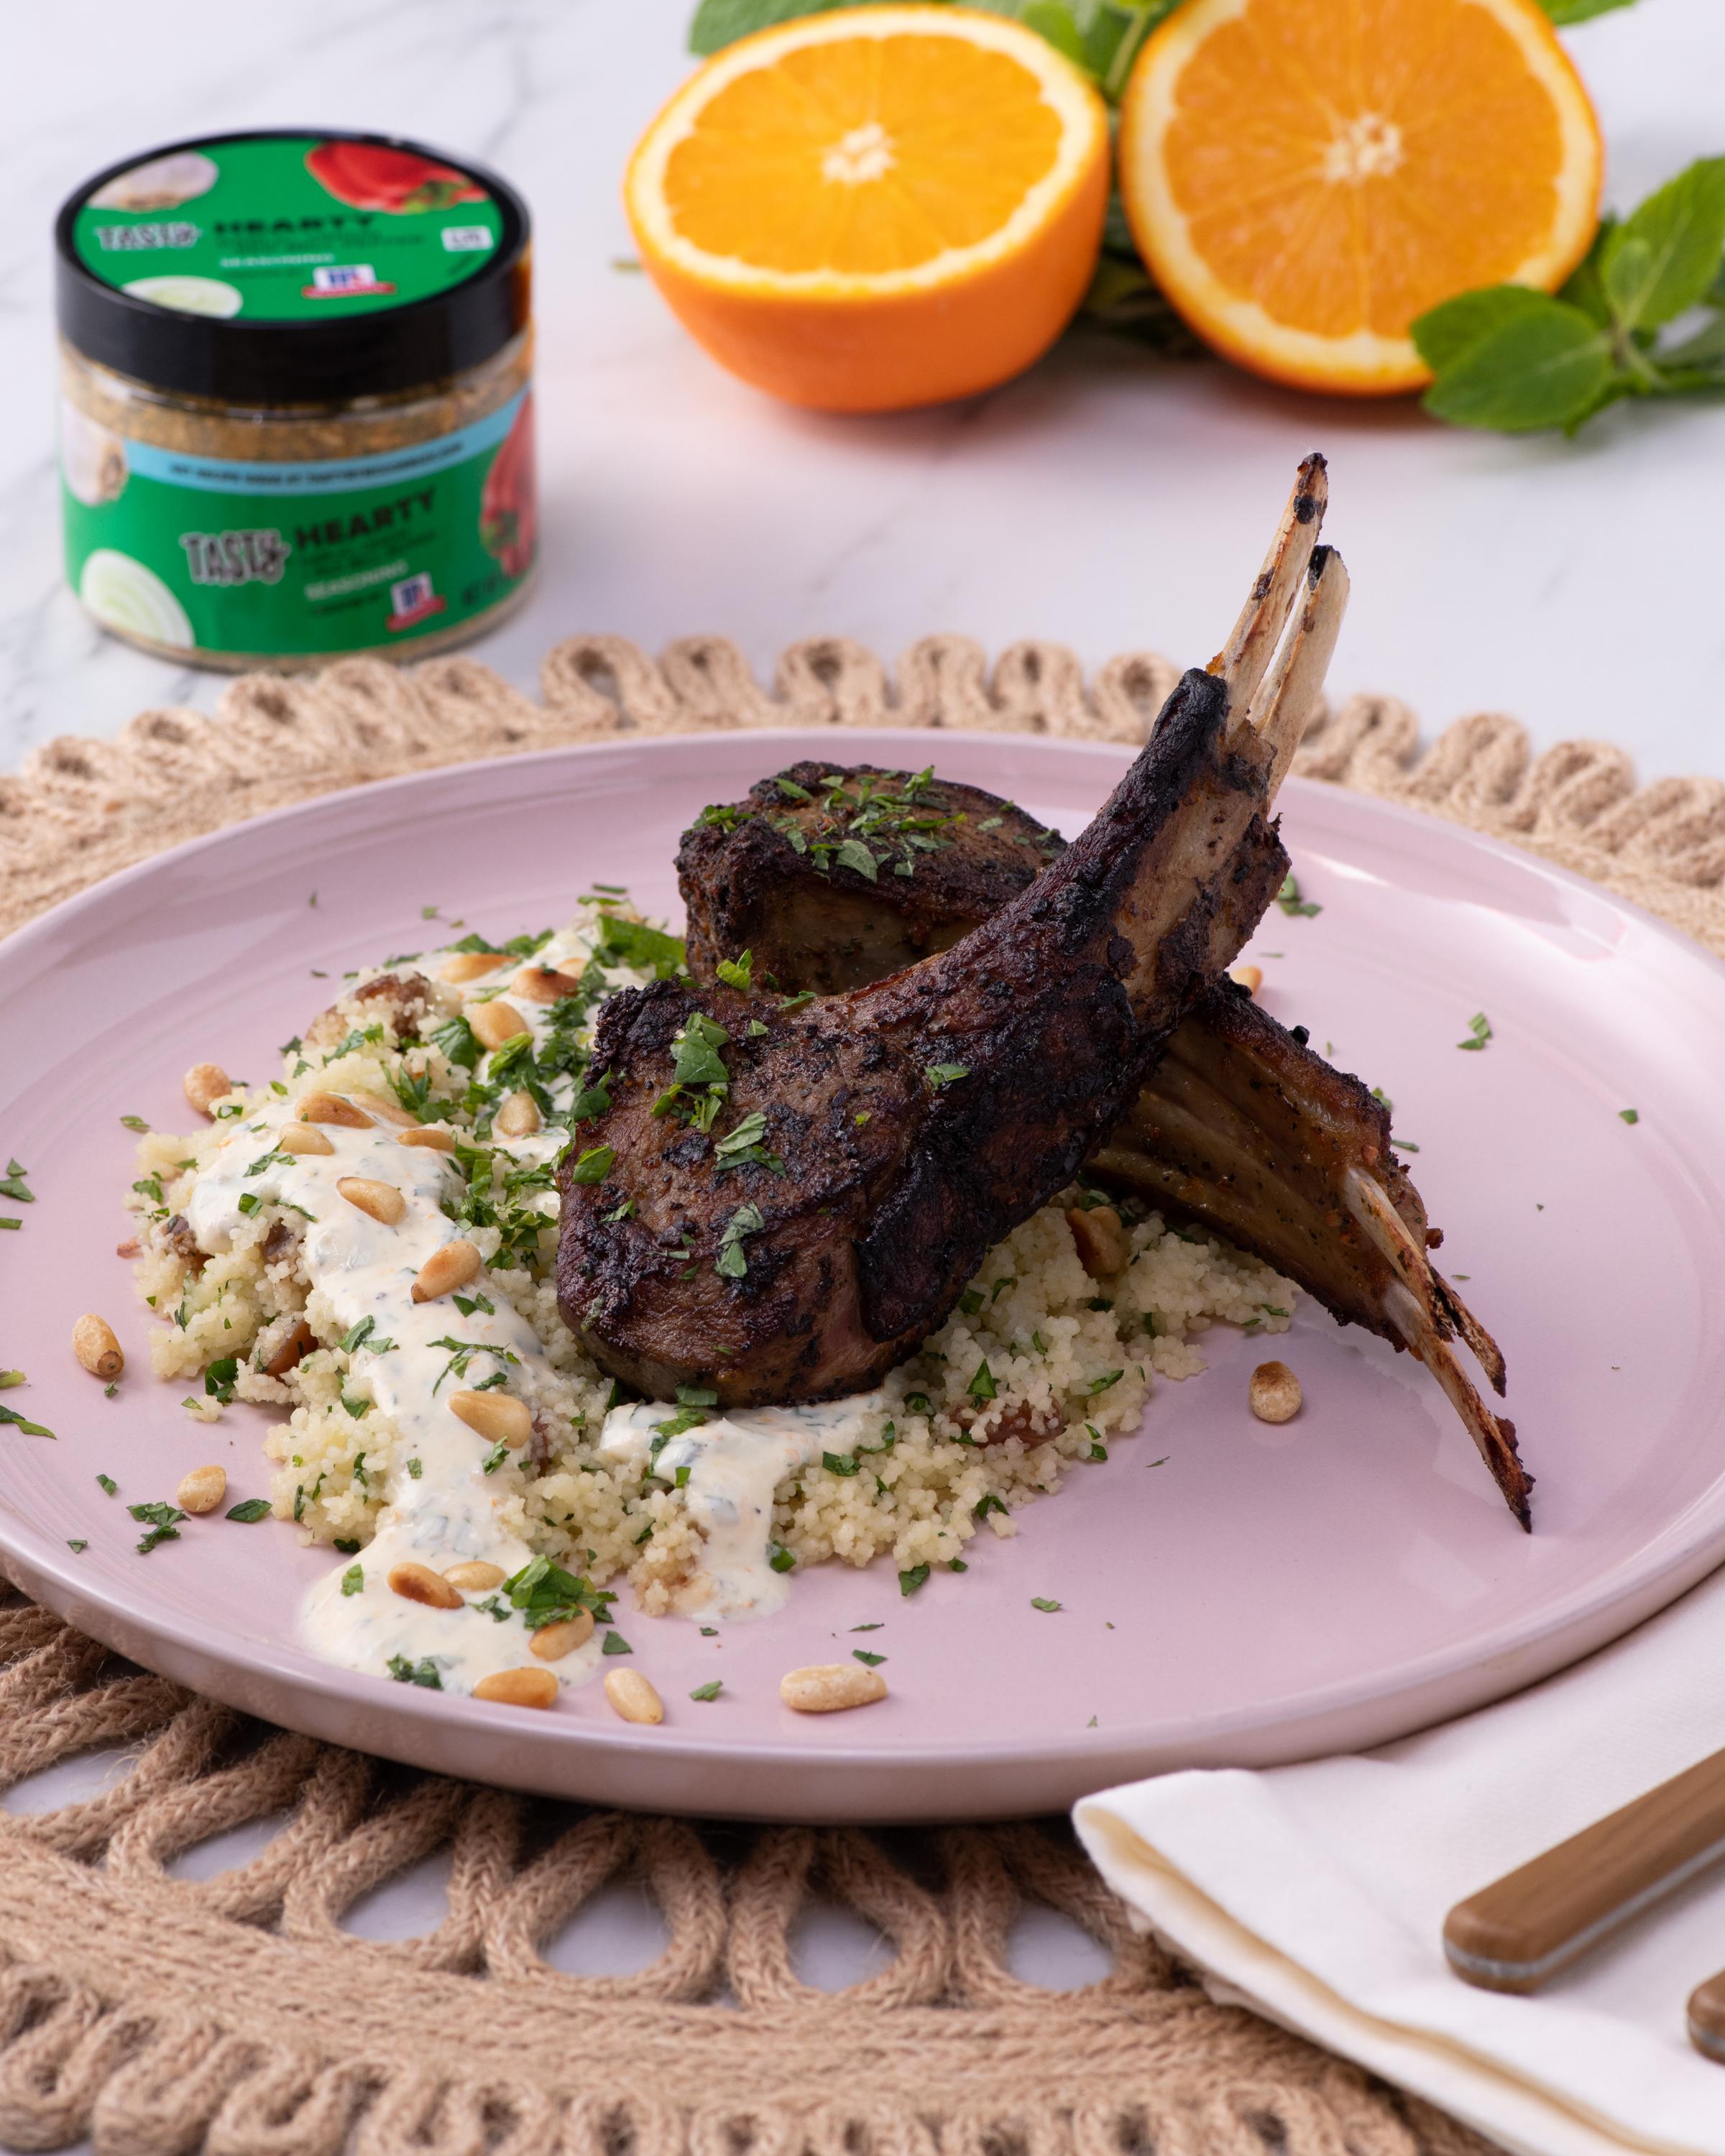 Hearty Lamb Chops With Couscous Recipe by Tasty